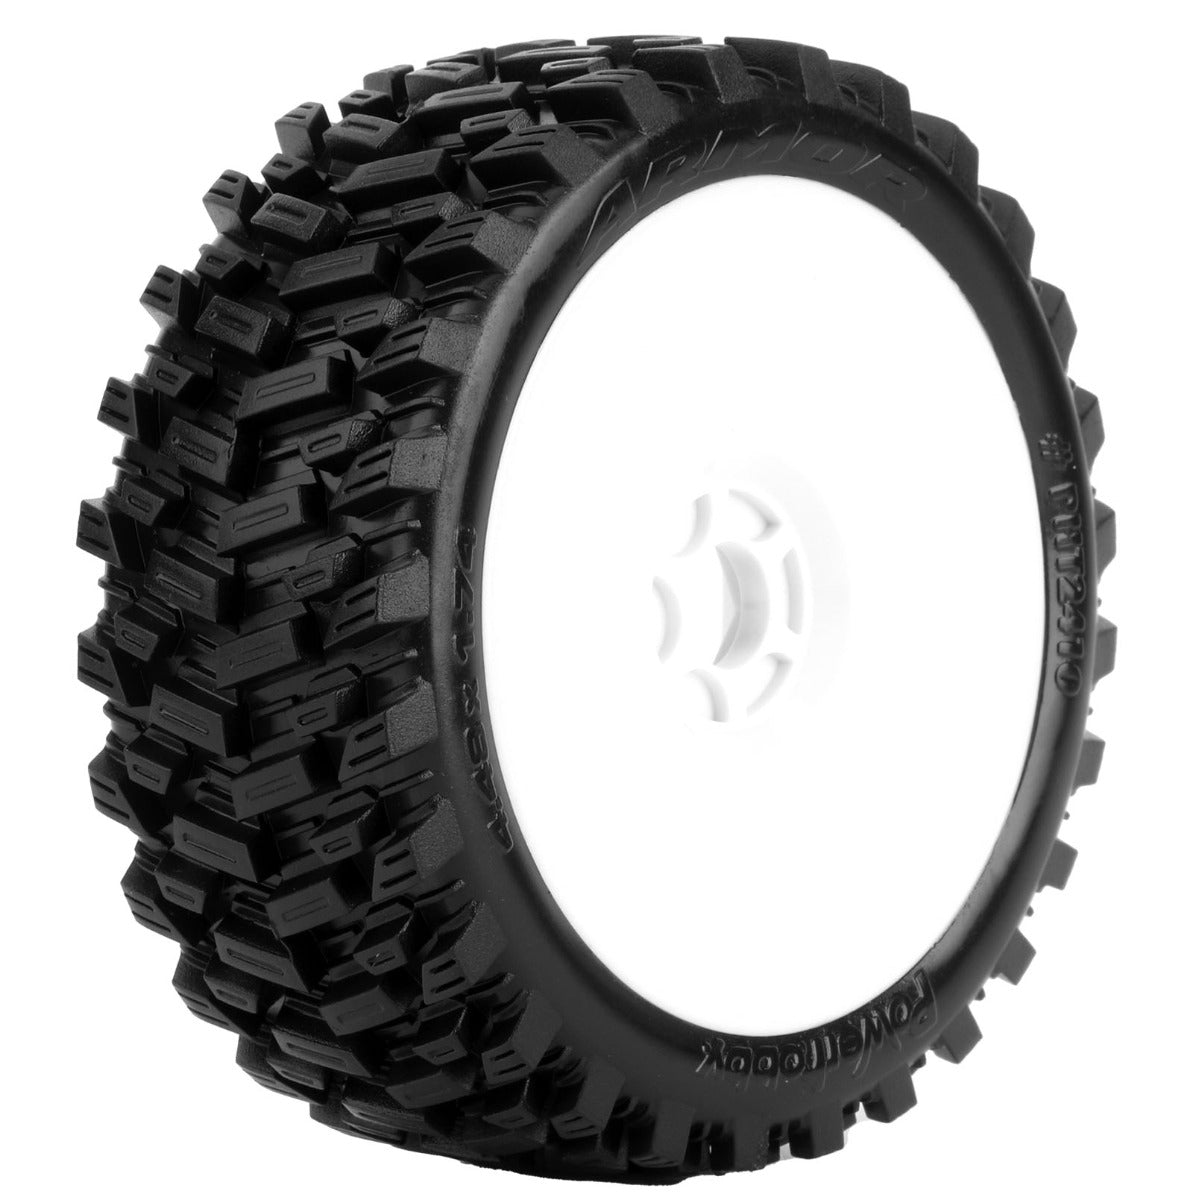 Powerhobby Armor 1/8 Buggy Belted All Terrain Mounted Tires 17MM White Dish Wheels - PowerHobby